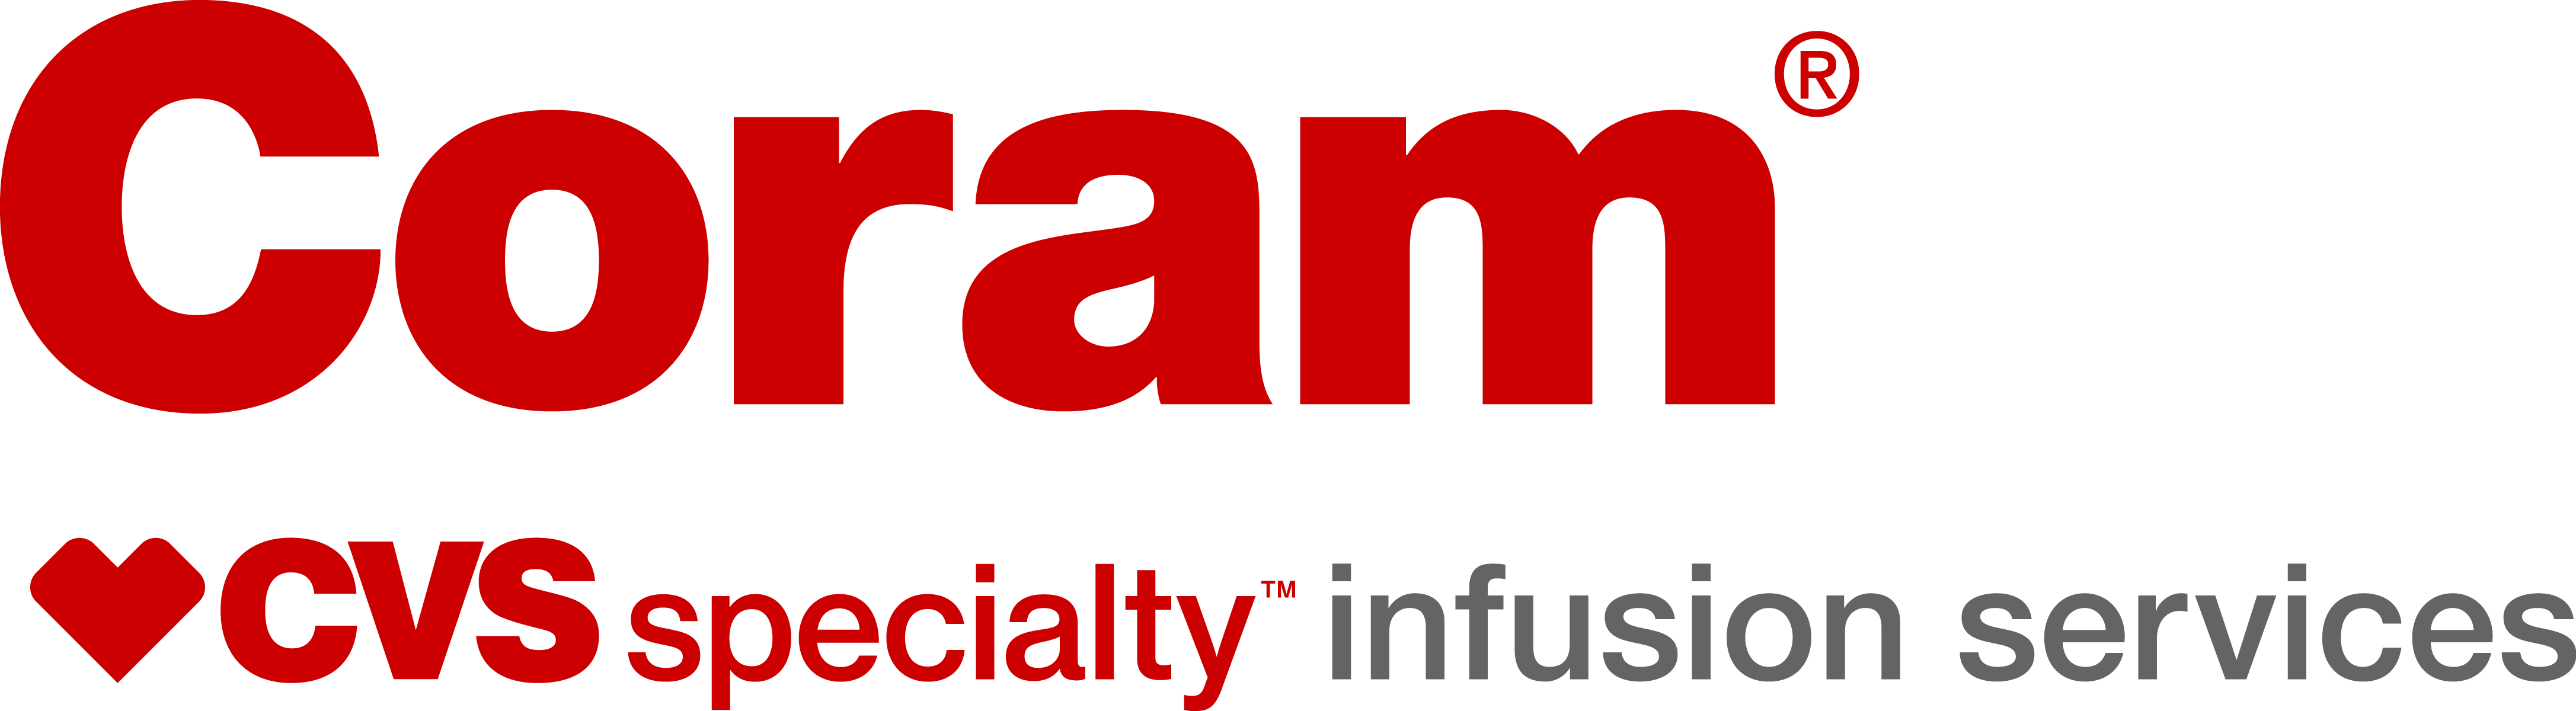 Coram Cvs Specialty Infusion Services (4346x1200)